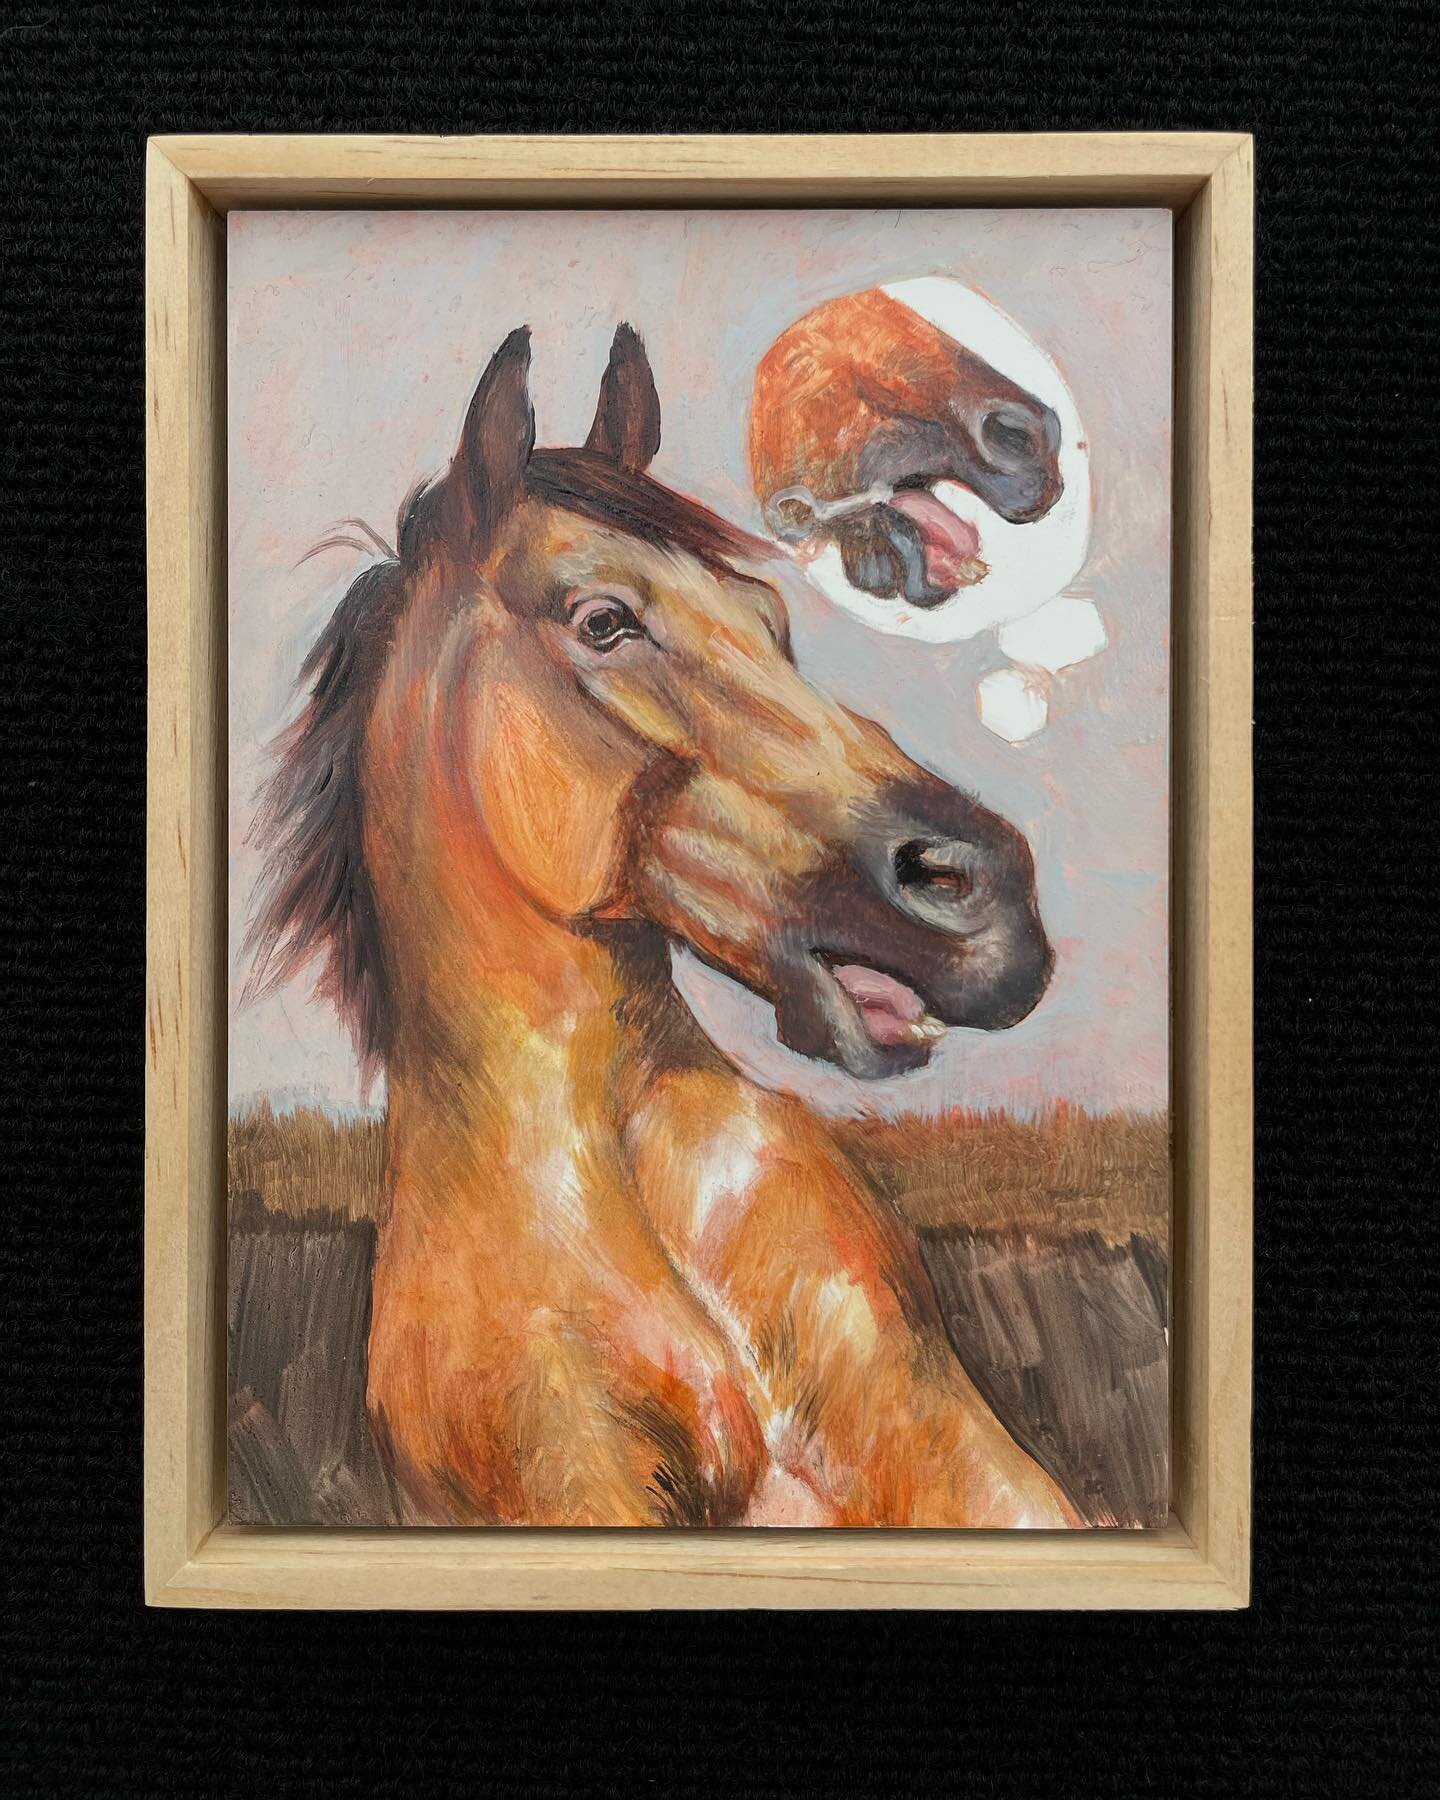 &ldquo;Horse Has a Sudden Flashback&rdquo; and other recent small works. Only the first and last pieces are available. 
#contemporarypainting #magicalrealism #greenvilleartist #yeahTHATgreenville #horselovers #cowlovers